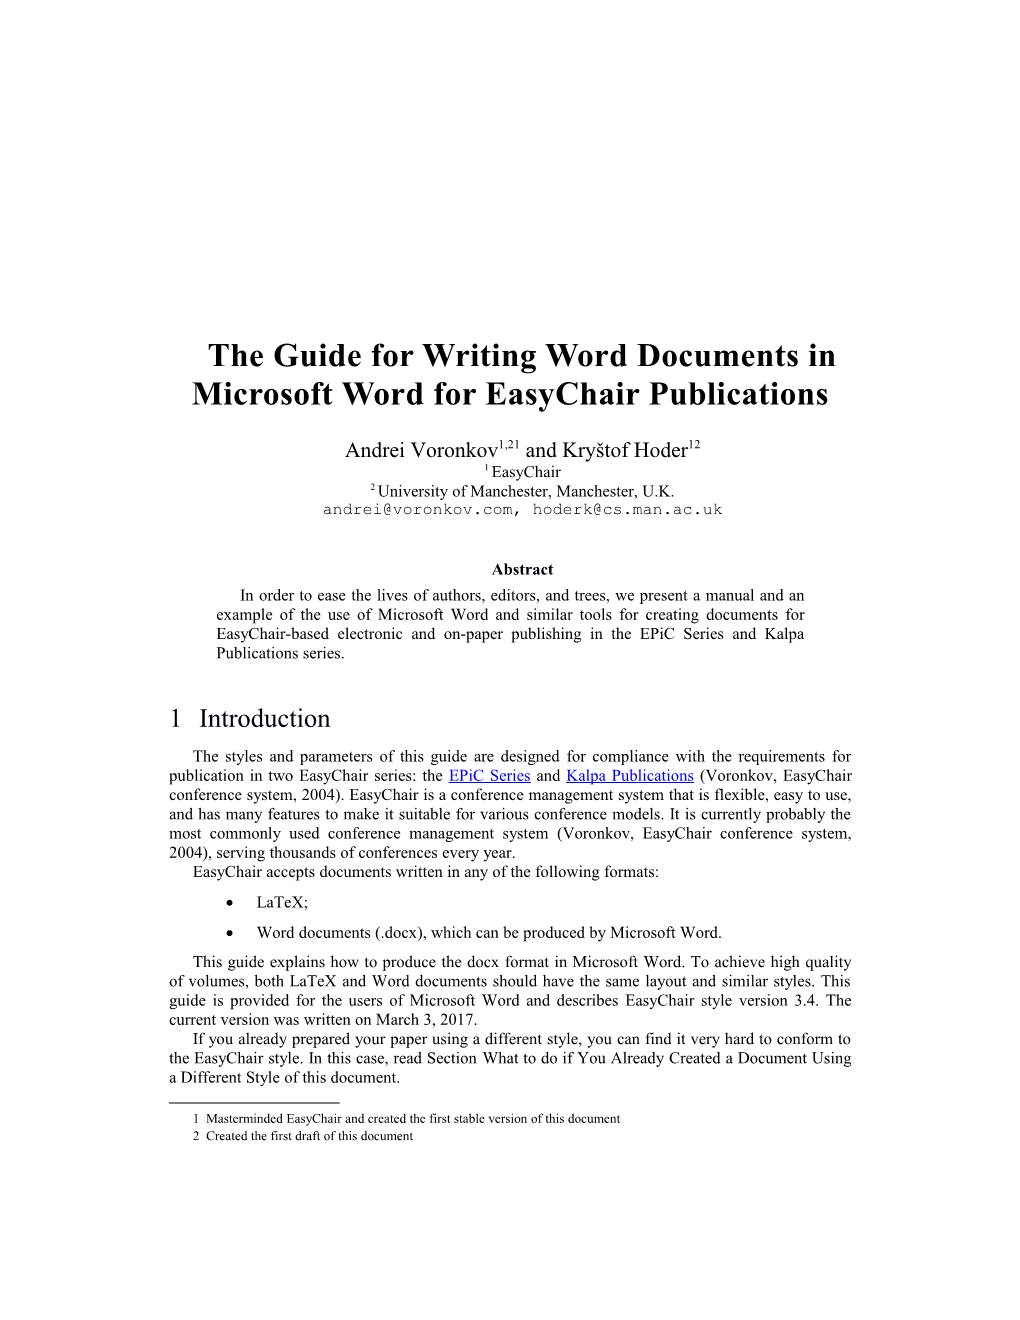 The Guide for Writing Word Documents in Microsoft Word for Easychair Publications